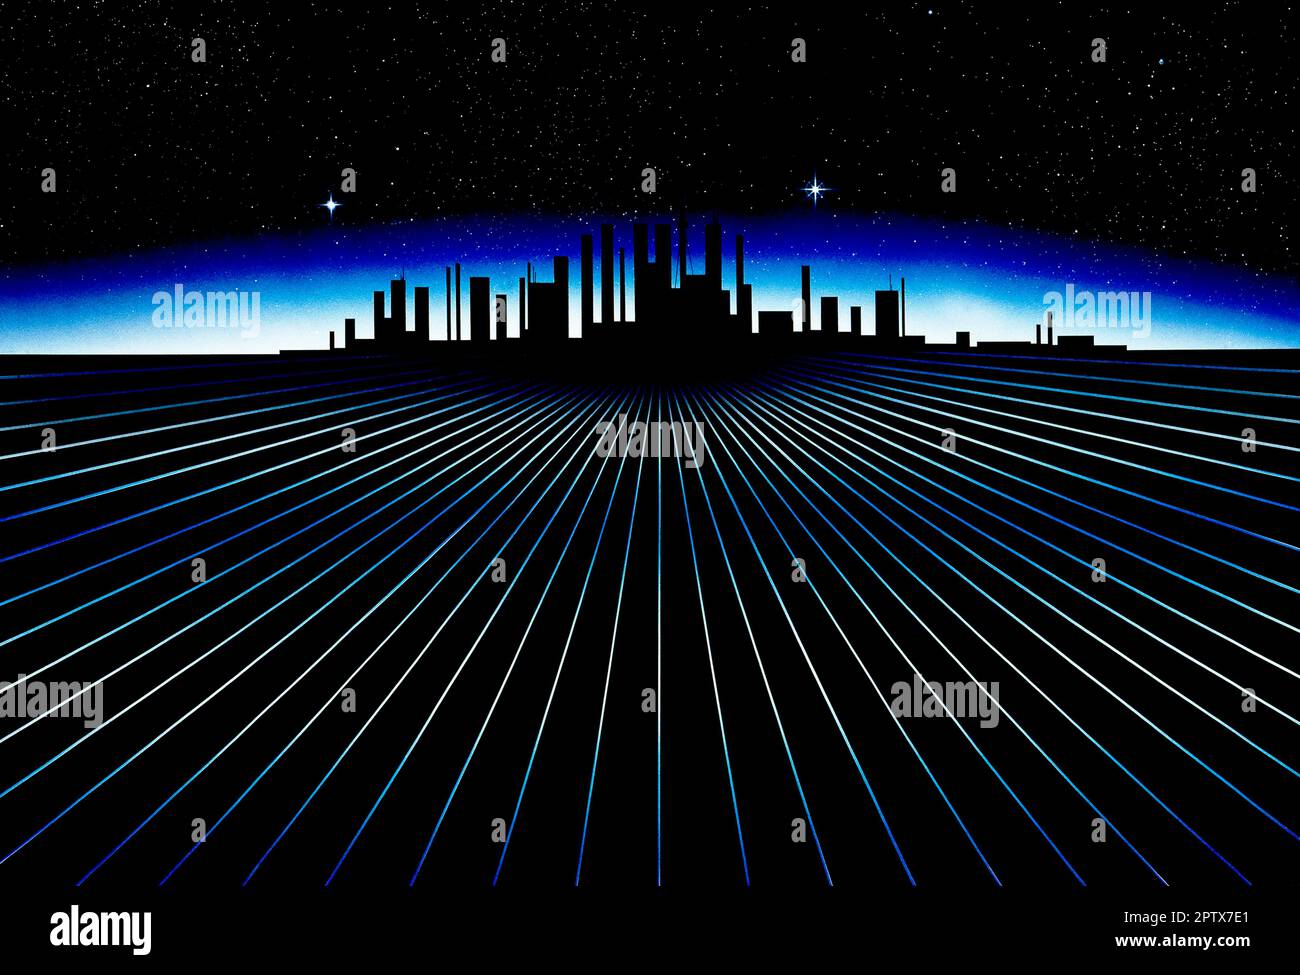 Concept Illustration. Silhouette of simulated city skyline on grid lines. Stock Photo